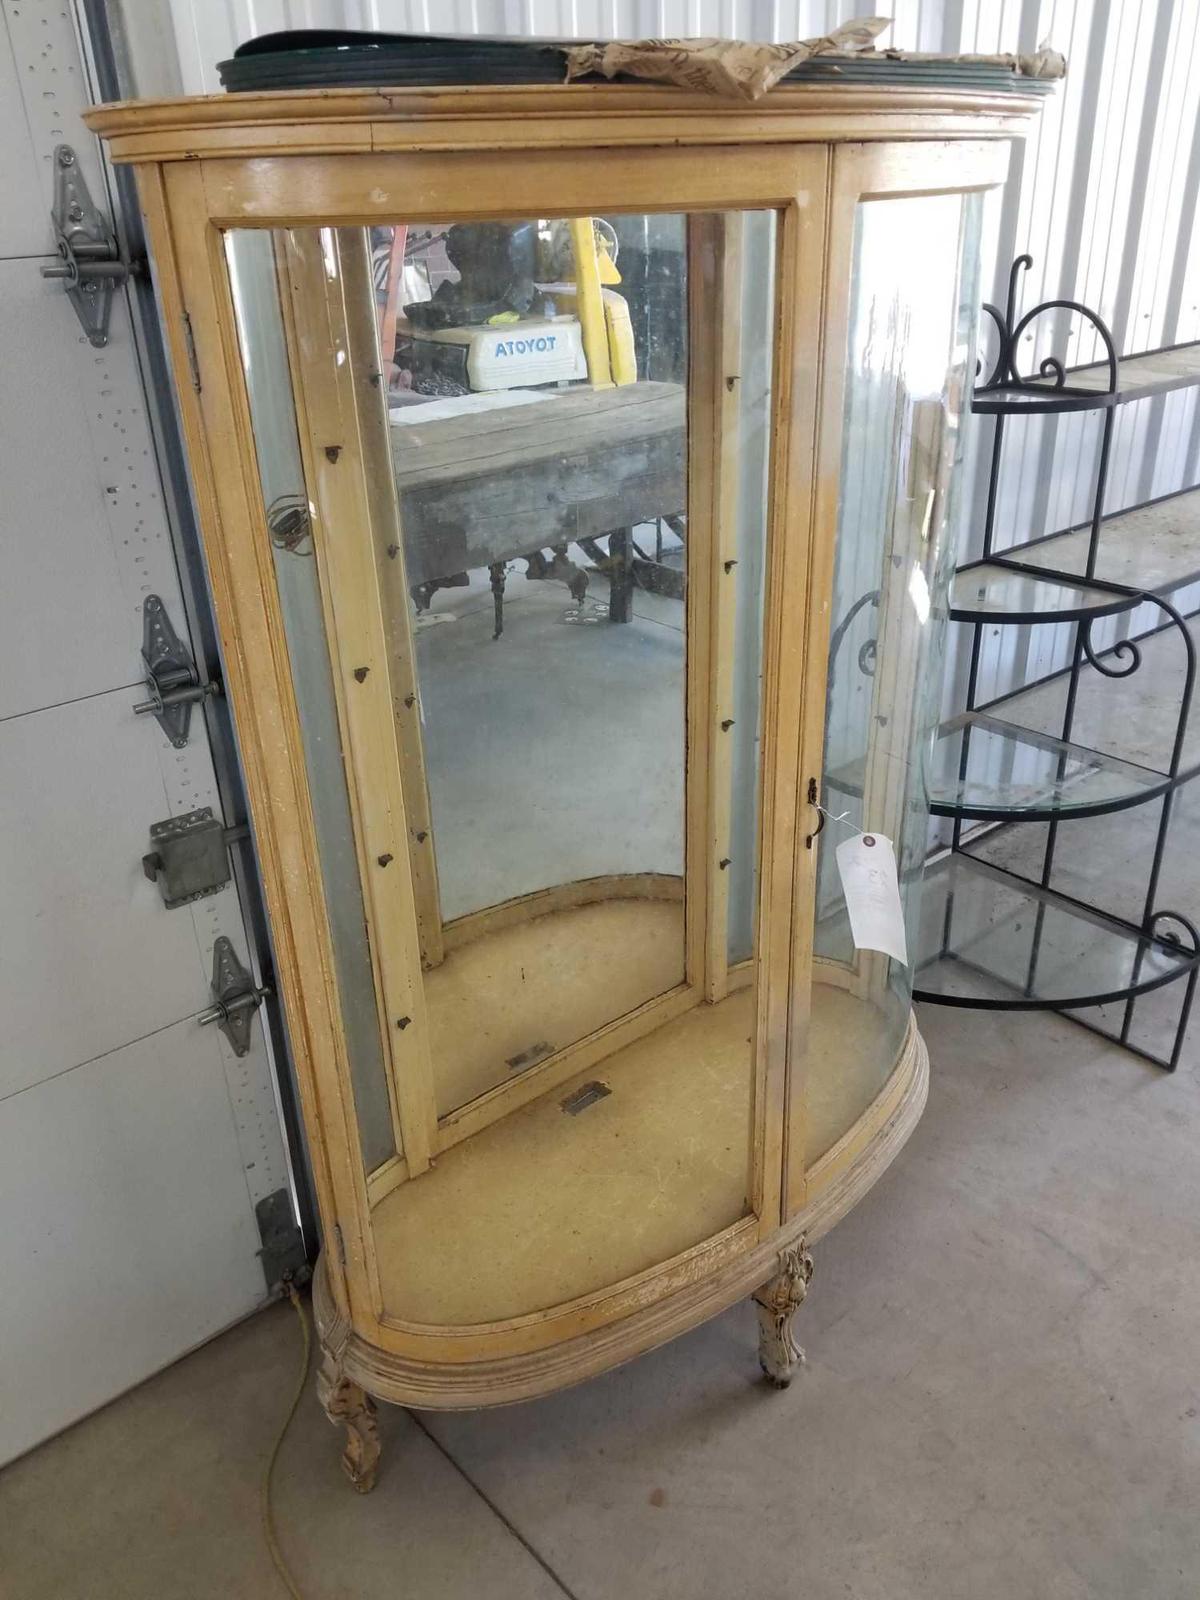 Oval china cabinet with glass shelves